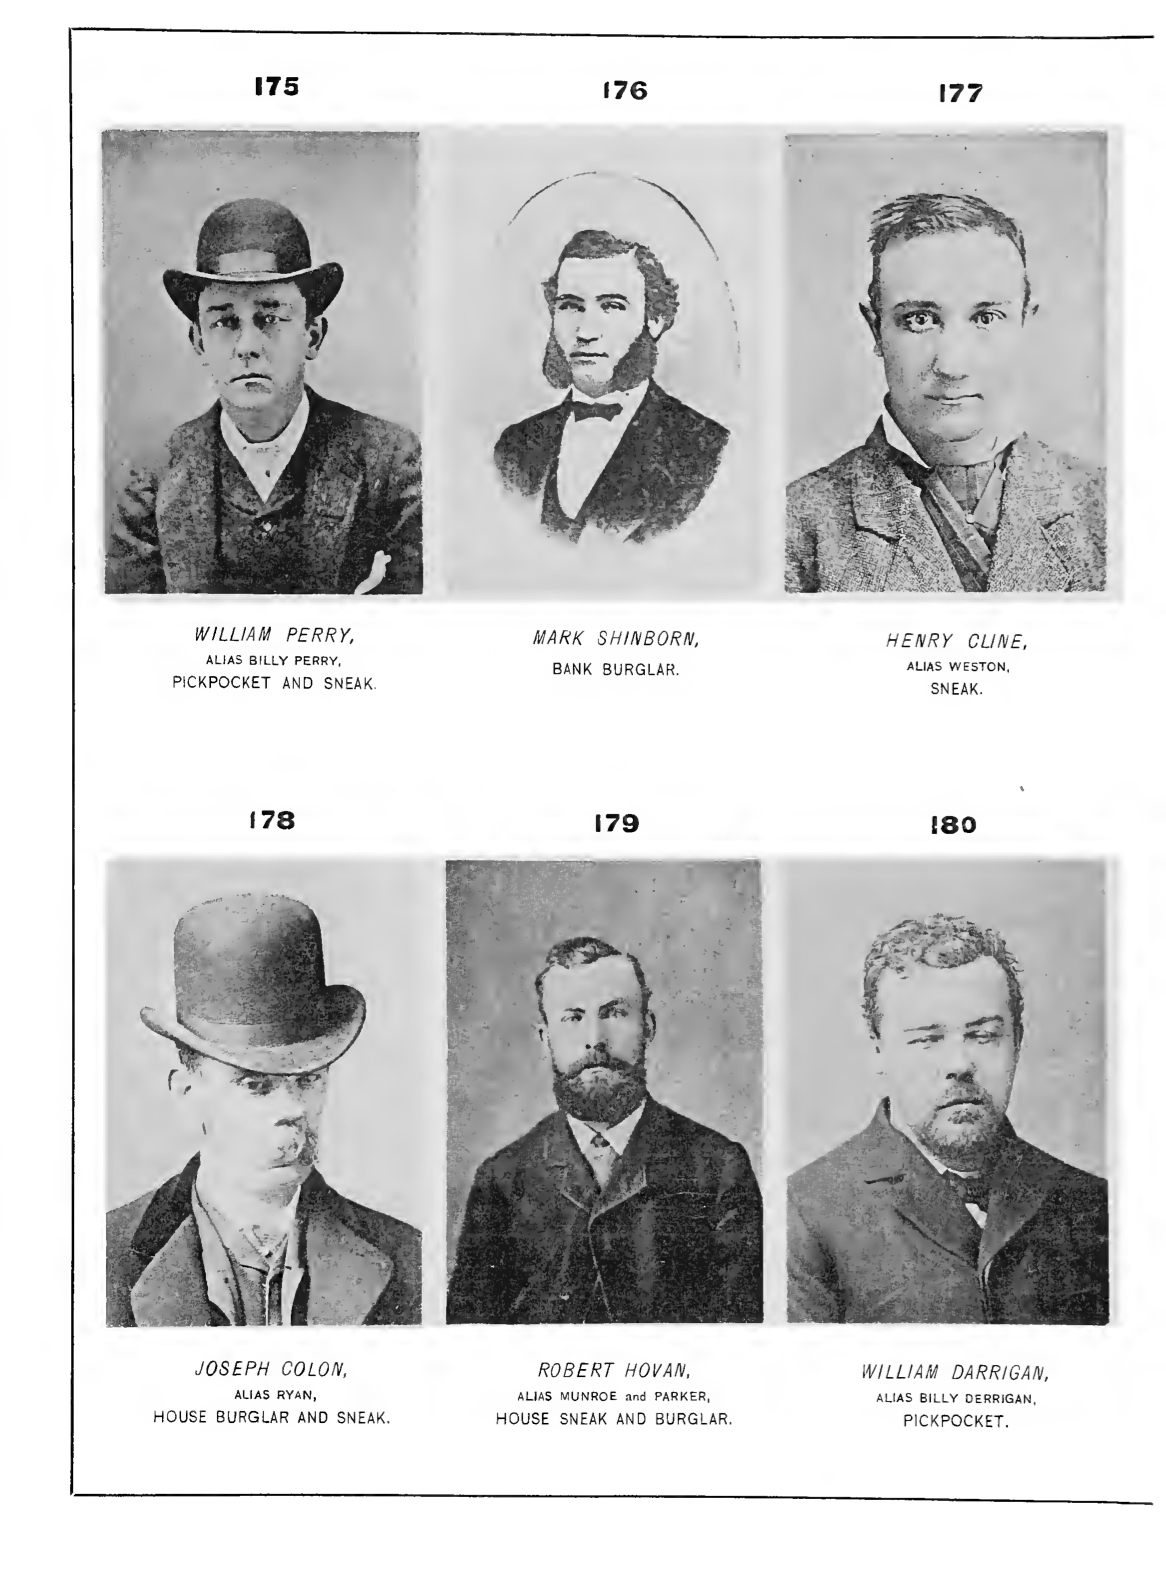 Standardized passport photos were thought to look like these mugshots from <em>Professional Criminals of America</em>, 1886.